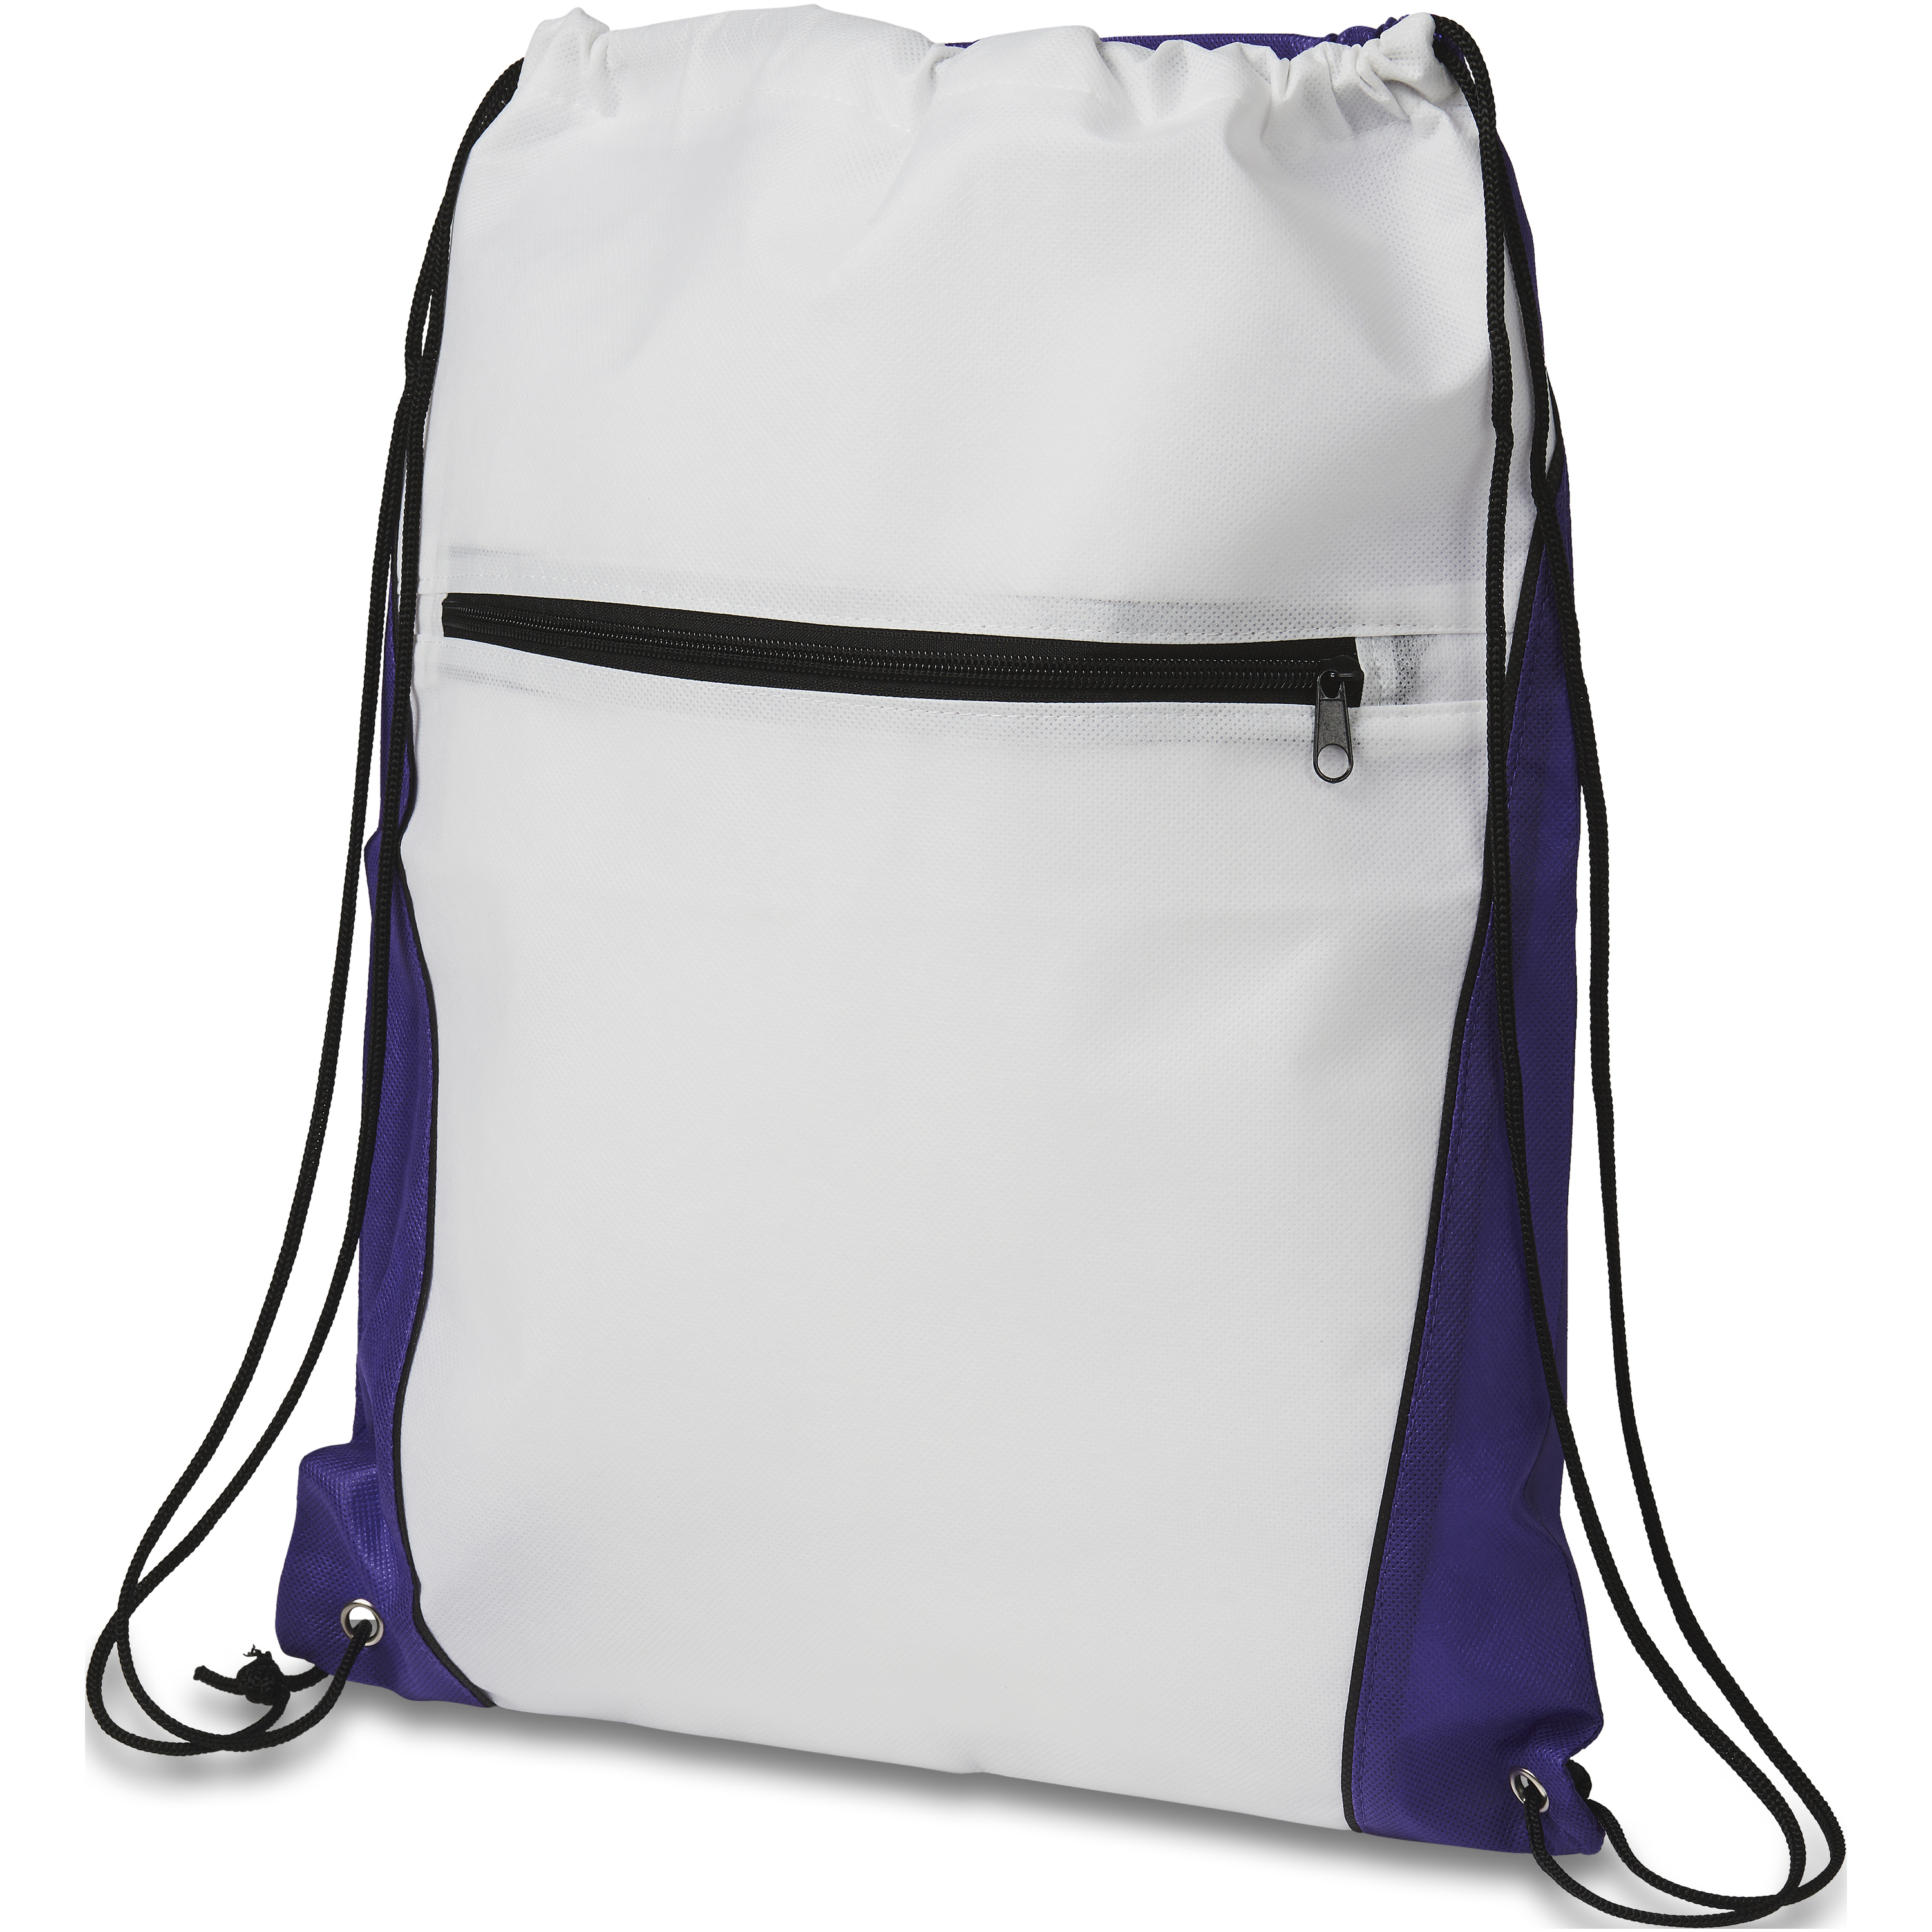 Contrast non-woven drawstring backpack